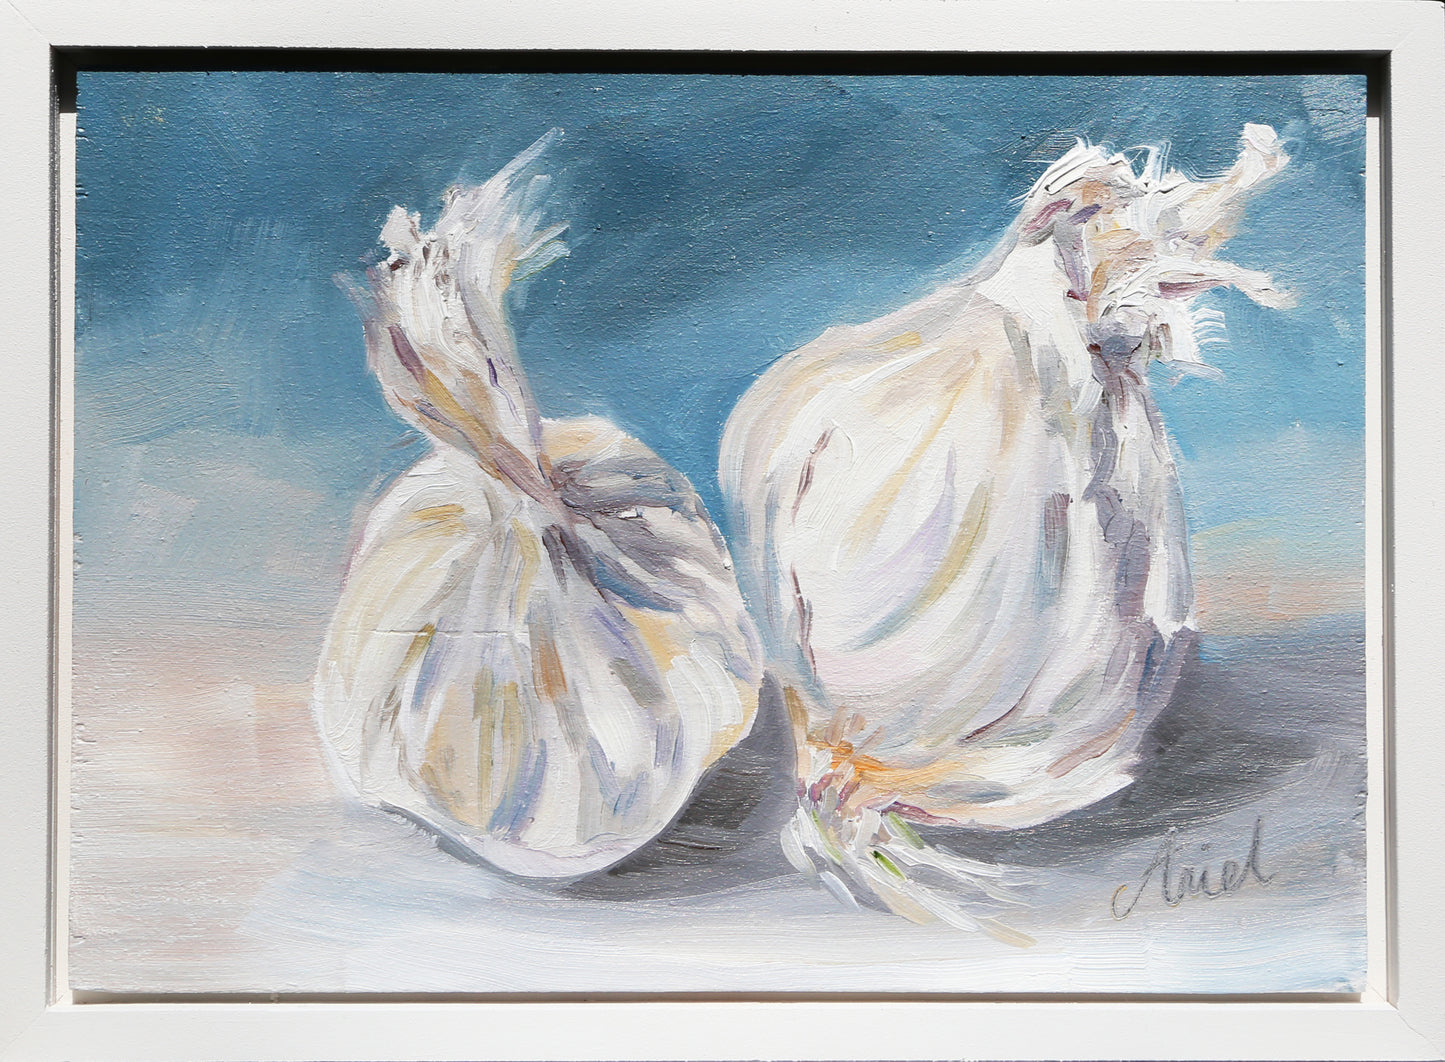 Introduce a touch of elegance to your home with Always Garlic. This original oil painting comes ready to hang in a white frame, and features a beautiful depiction of garlic in shades of blue. Elevate your home decor with this contemporary and fine art piece.